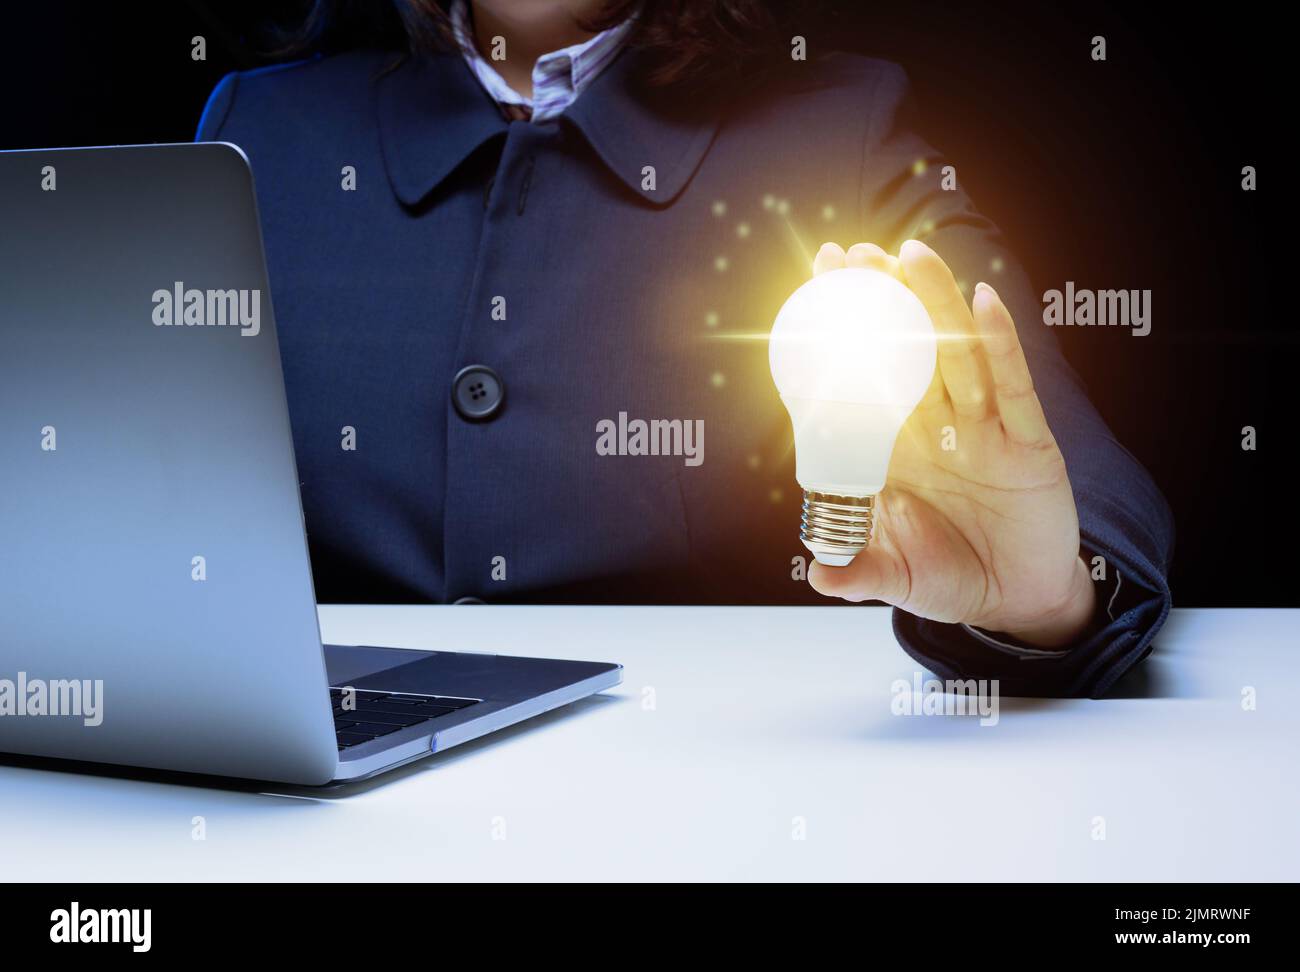 A woman's hand holds a light bulb, the concept of innovation through ideas and inspiration. Business development through the sea Stock Photo